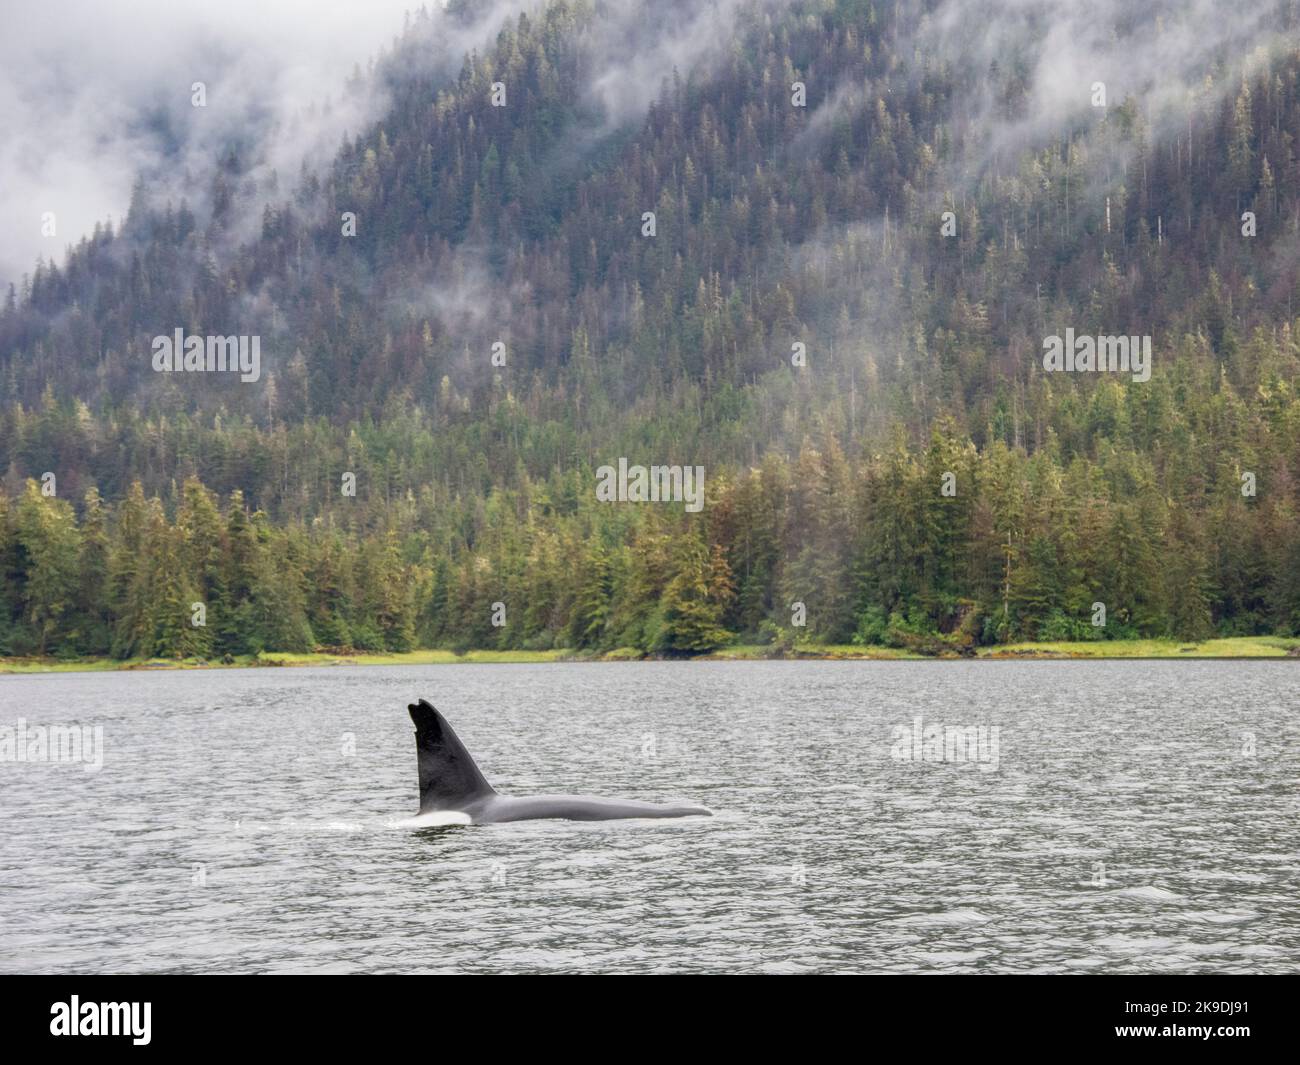 Orca Whales, Tongass National Forest, Alaska. Foto Stock